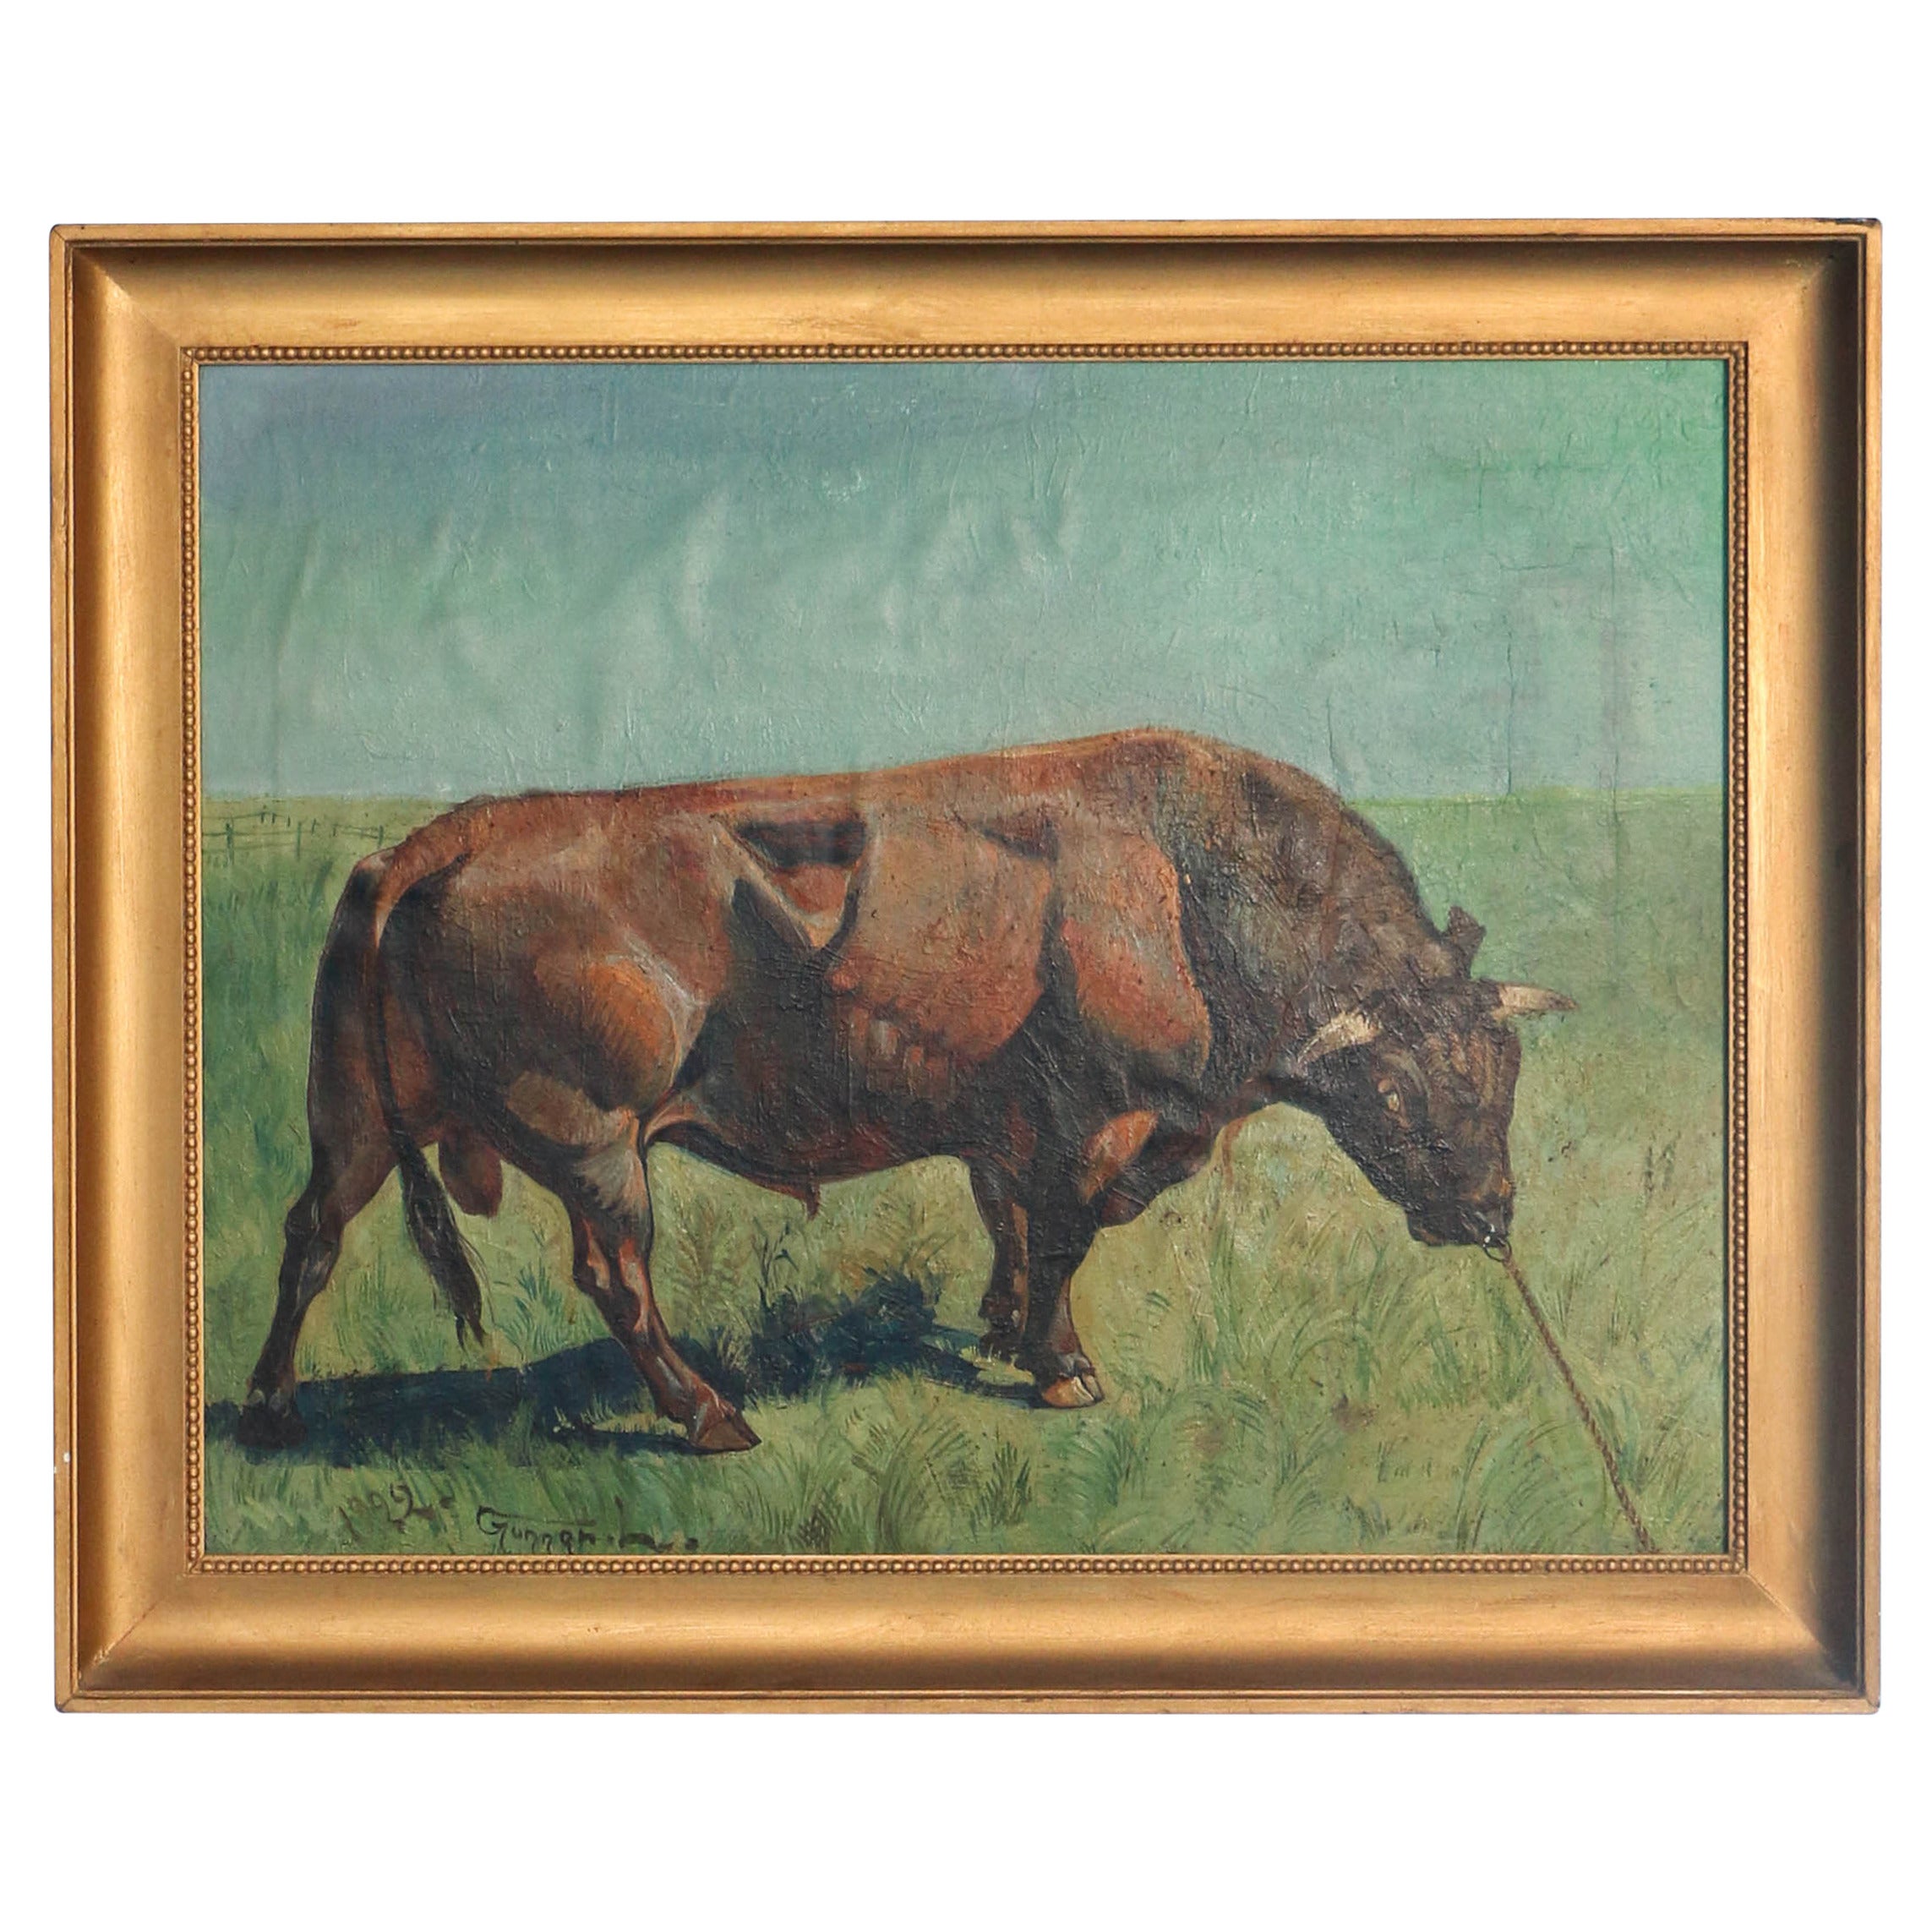 Original Oil on Canvas Painting of Bull in Field, Signed Gunnar L., Dated 1922